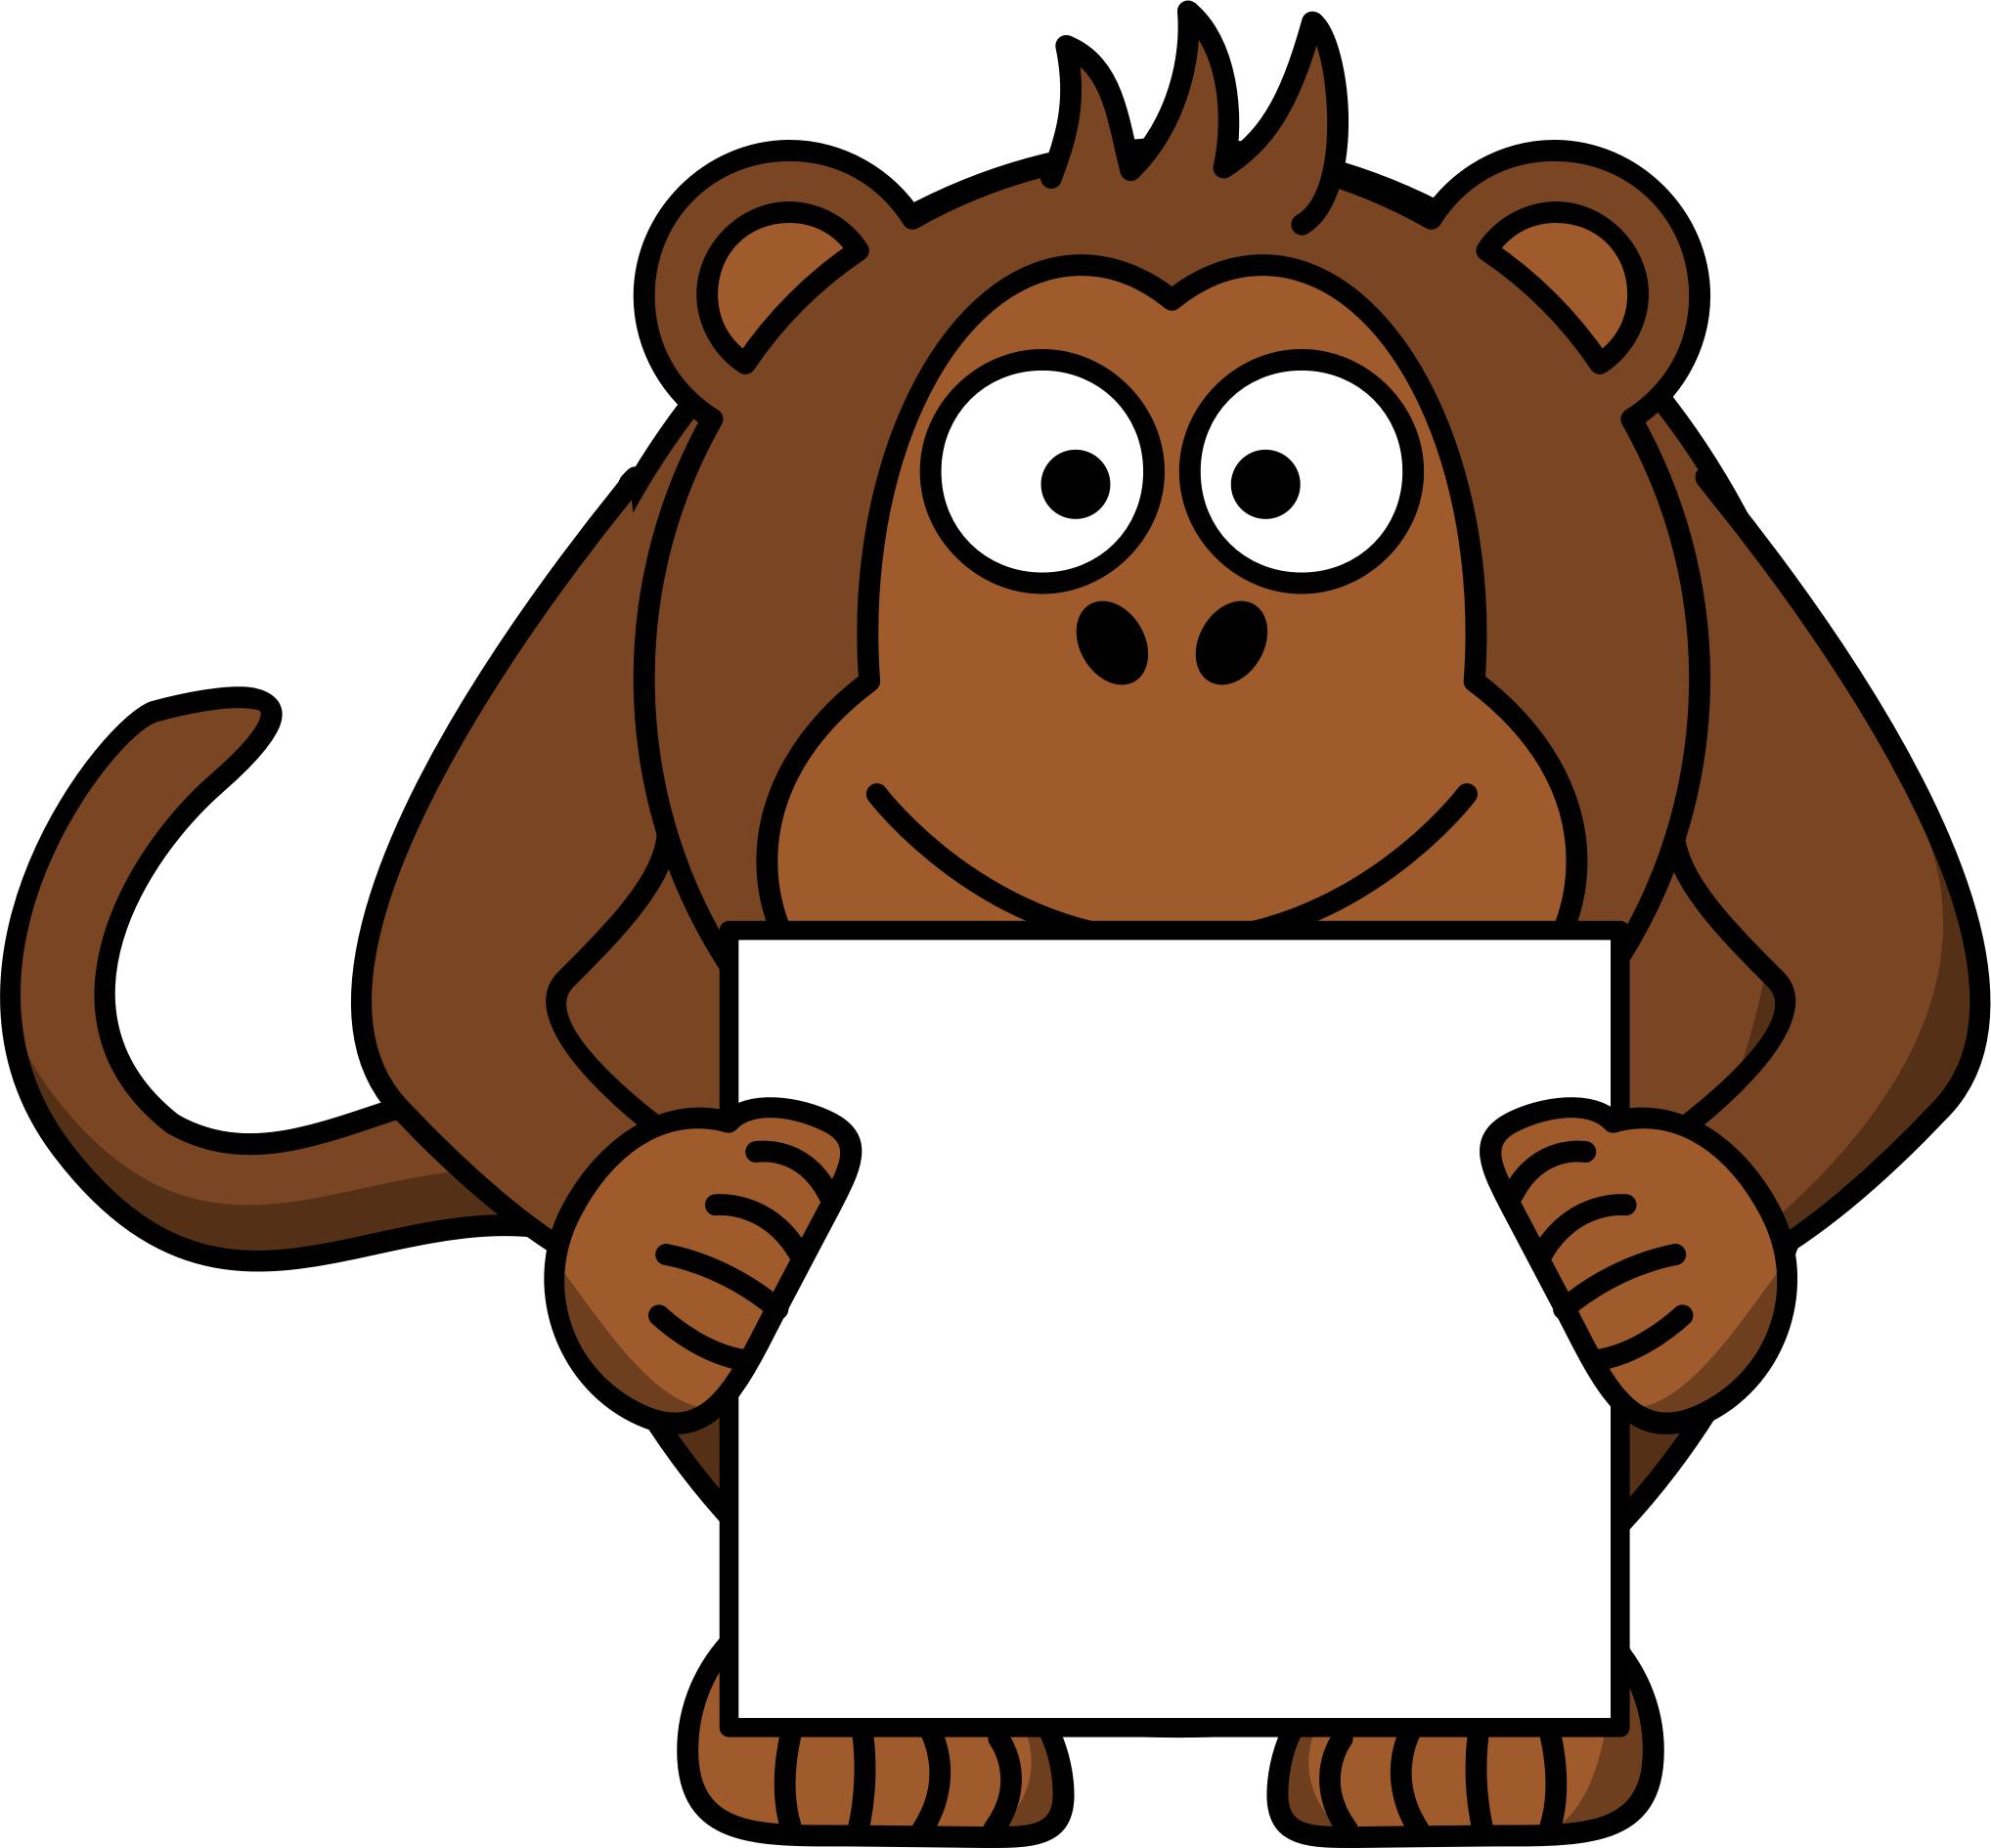 sign-holding monkey png